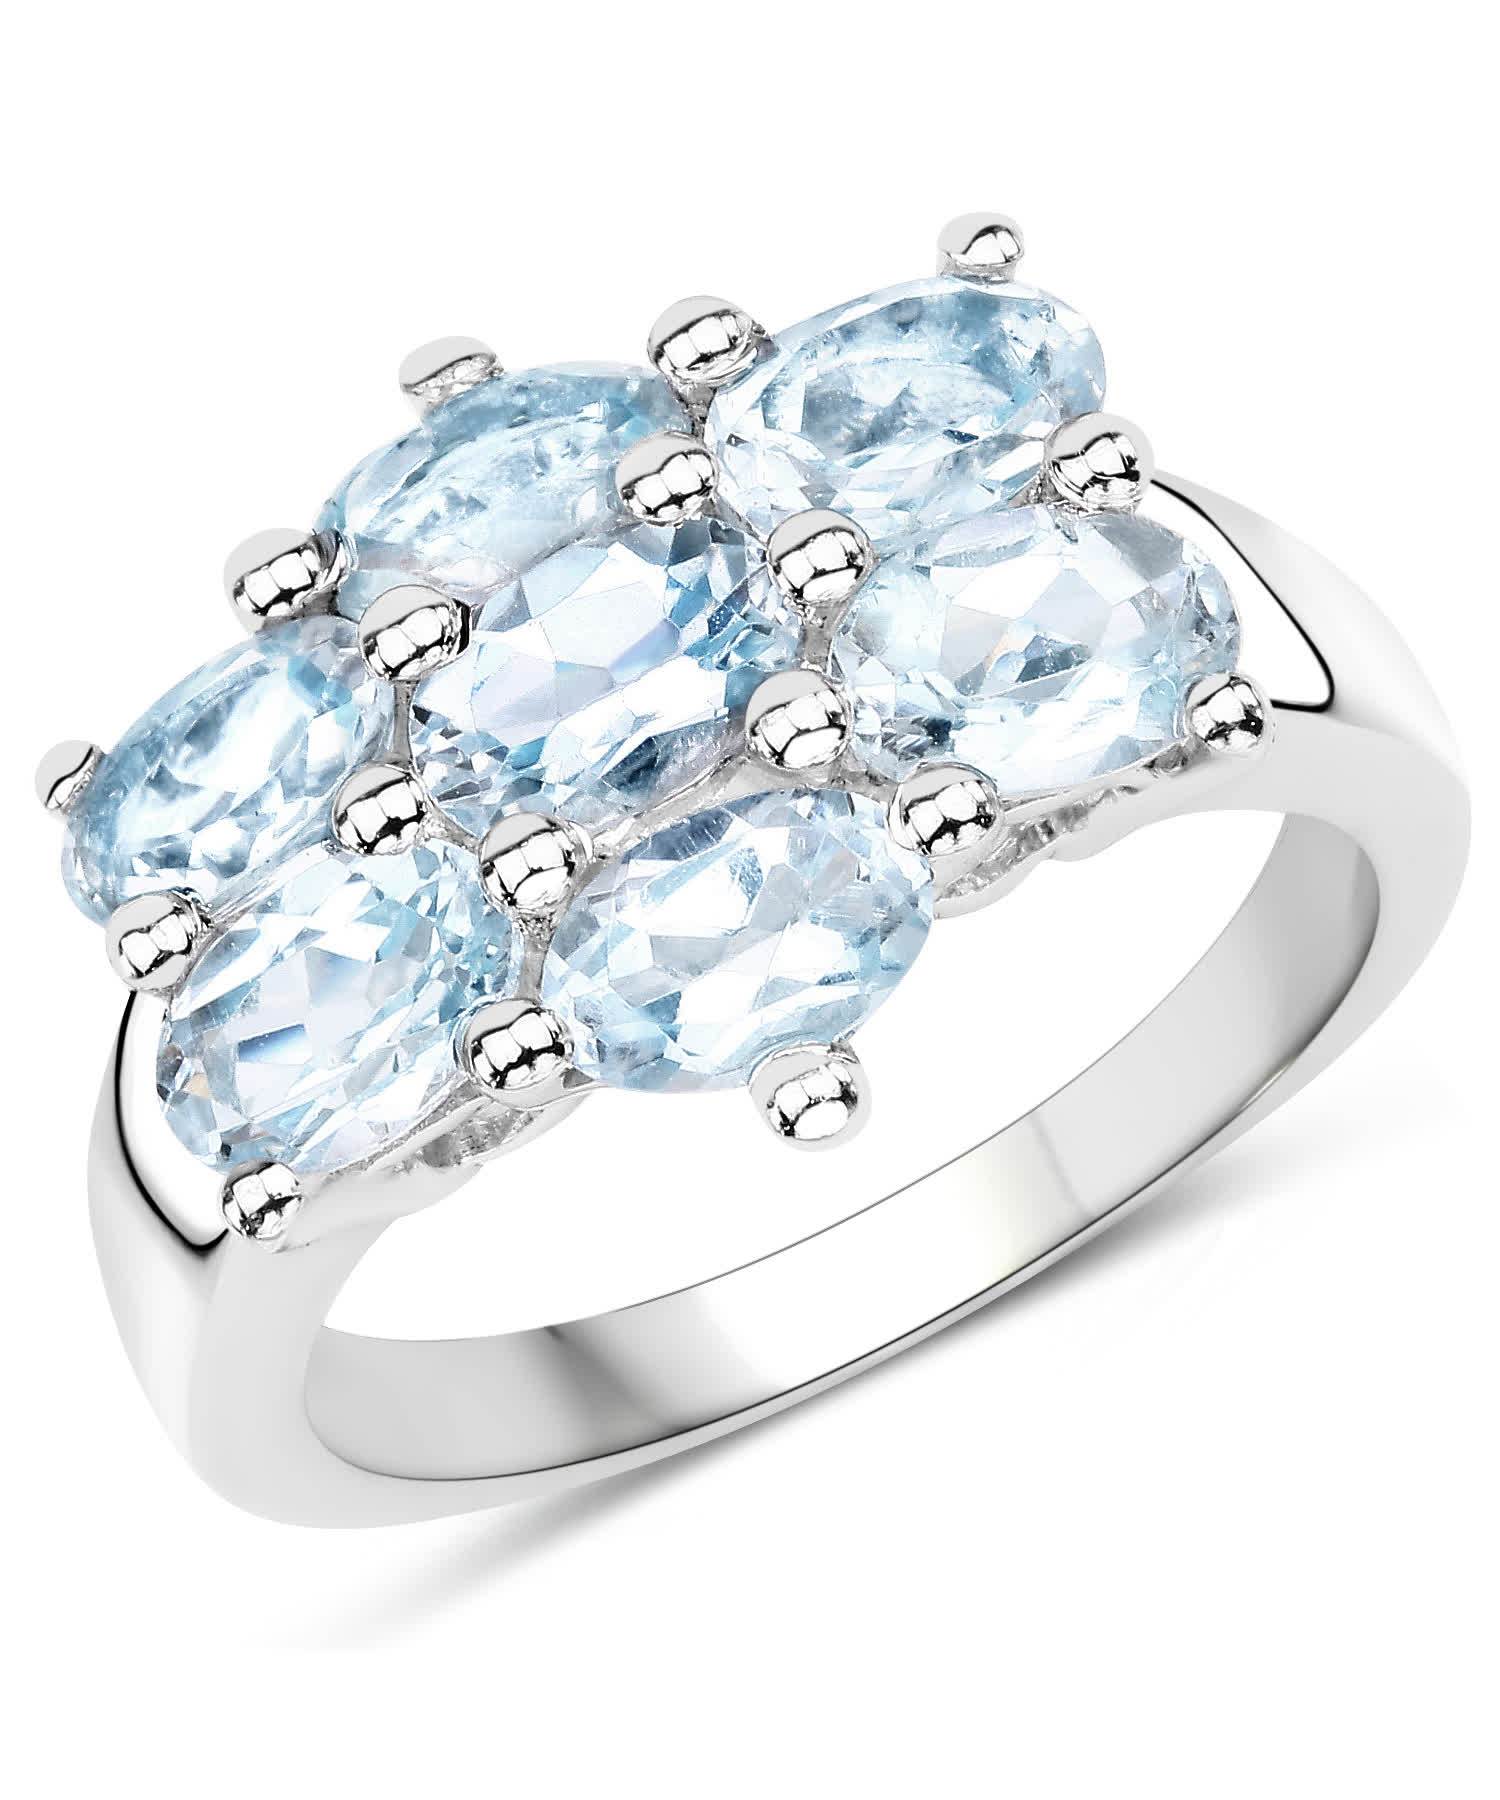 3.57ctw Natural Sky Blue Topaz Rhodium Plated 925 Sterling Silver Fashion Ring View 1